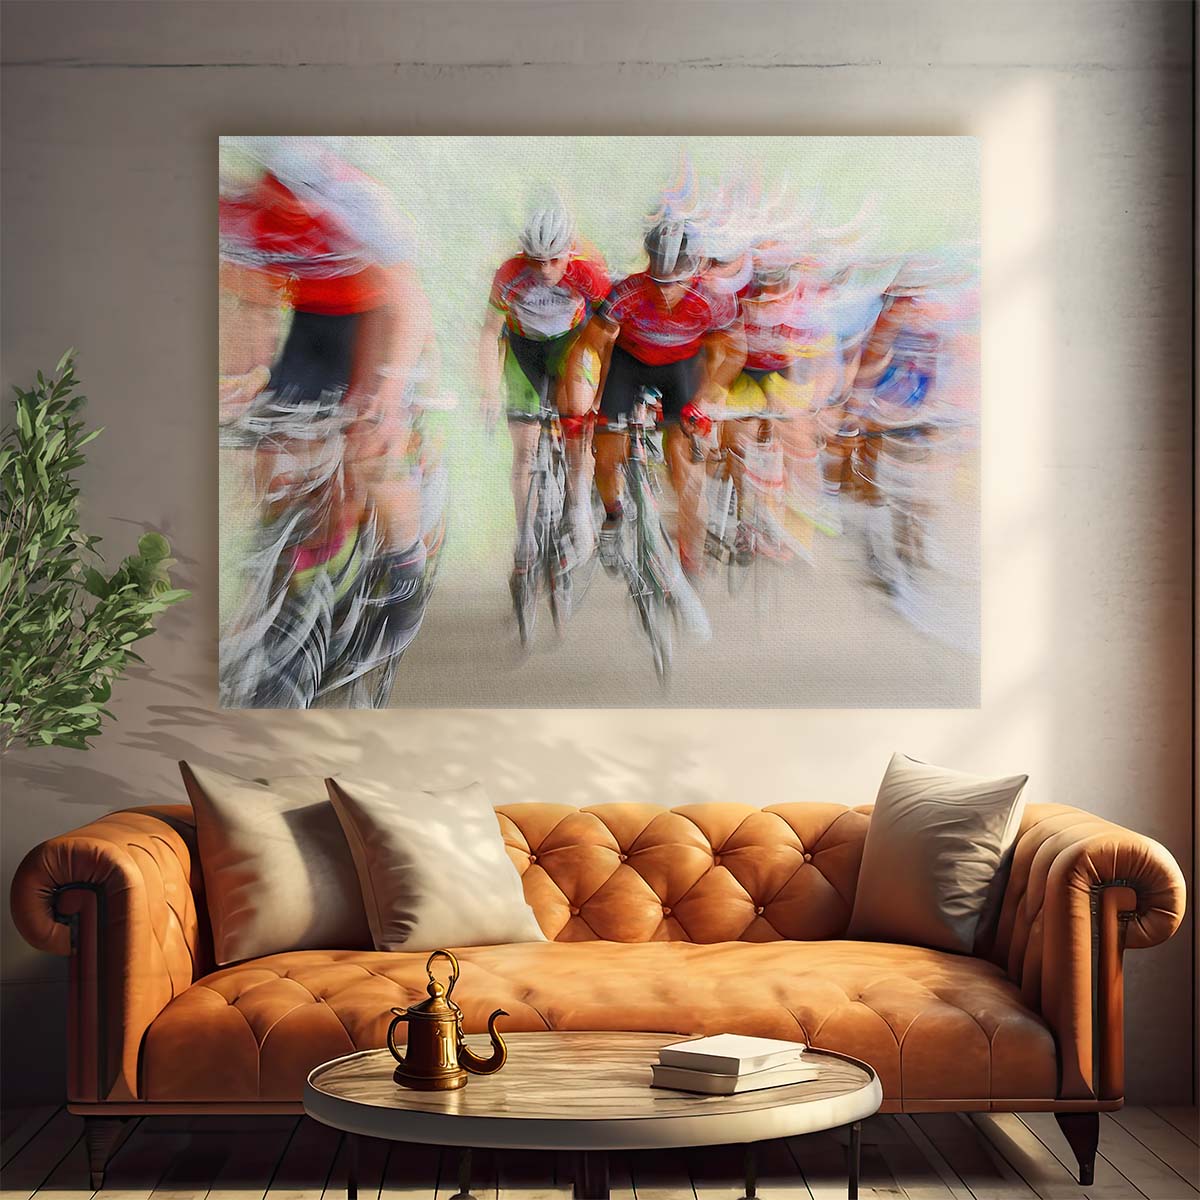 Dynamic Bicycle Race Blur Action Sports Wall Art by Luxuriance Designs. Made in USA.